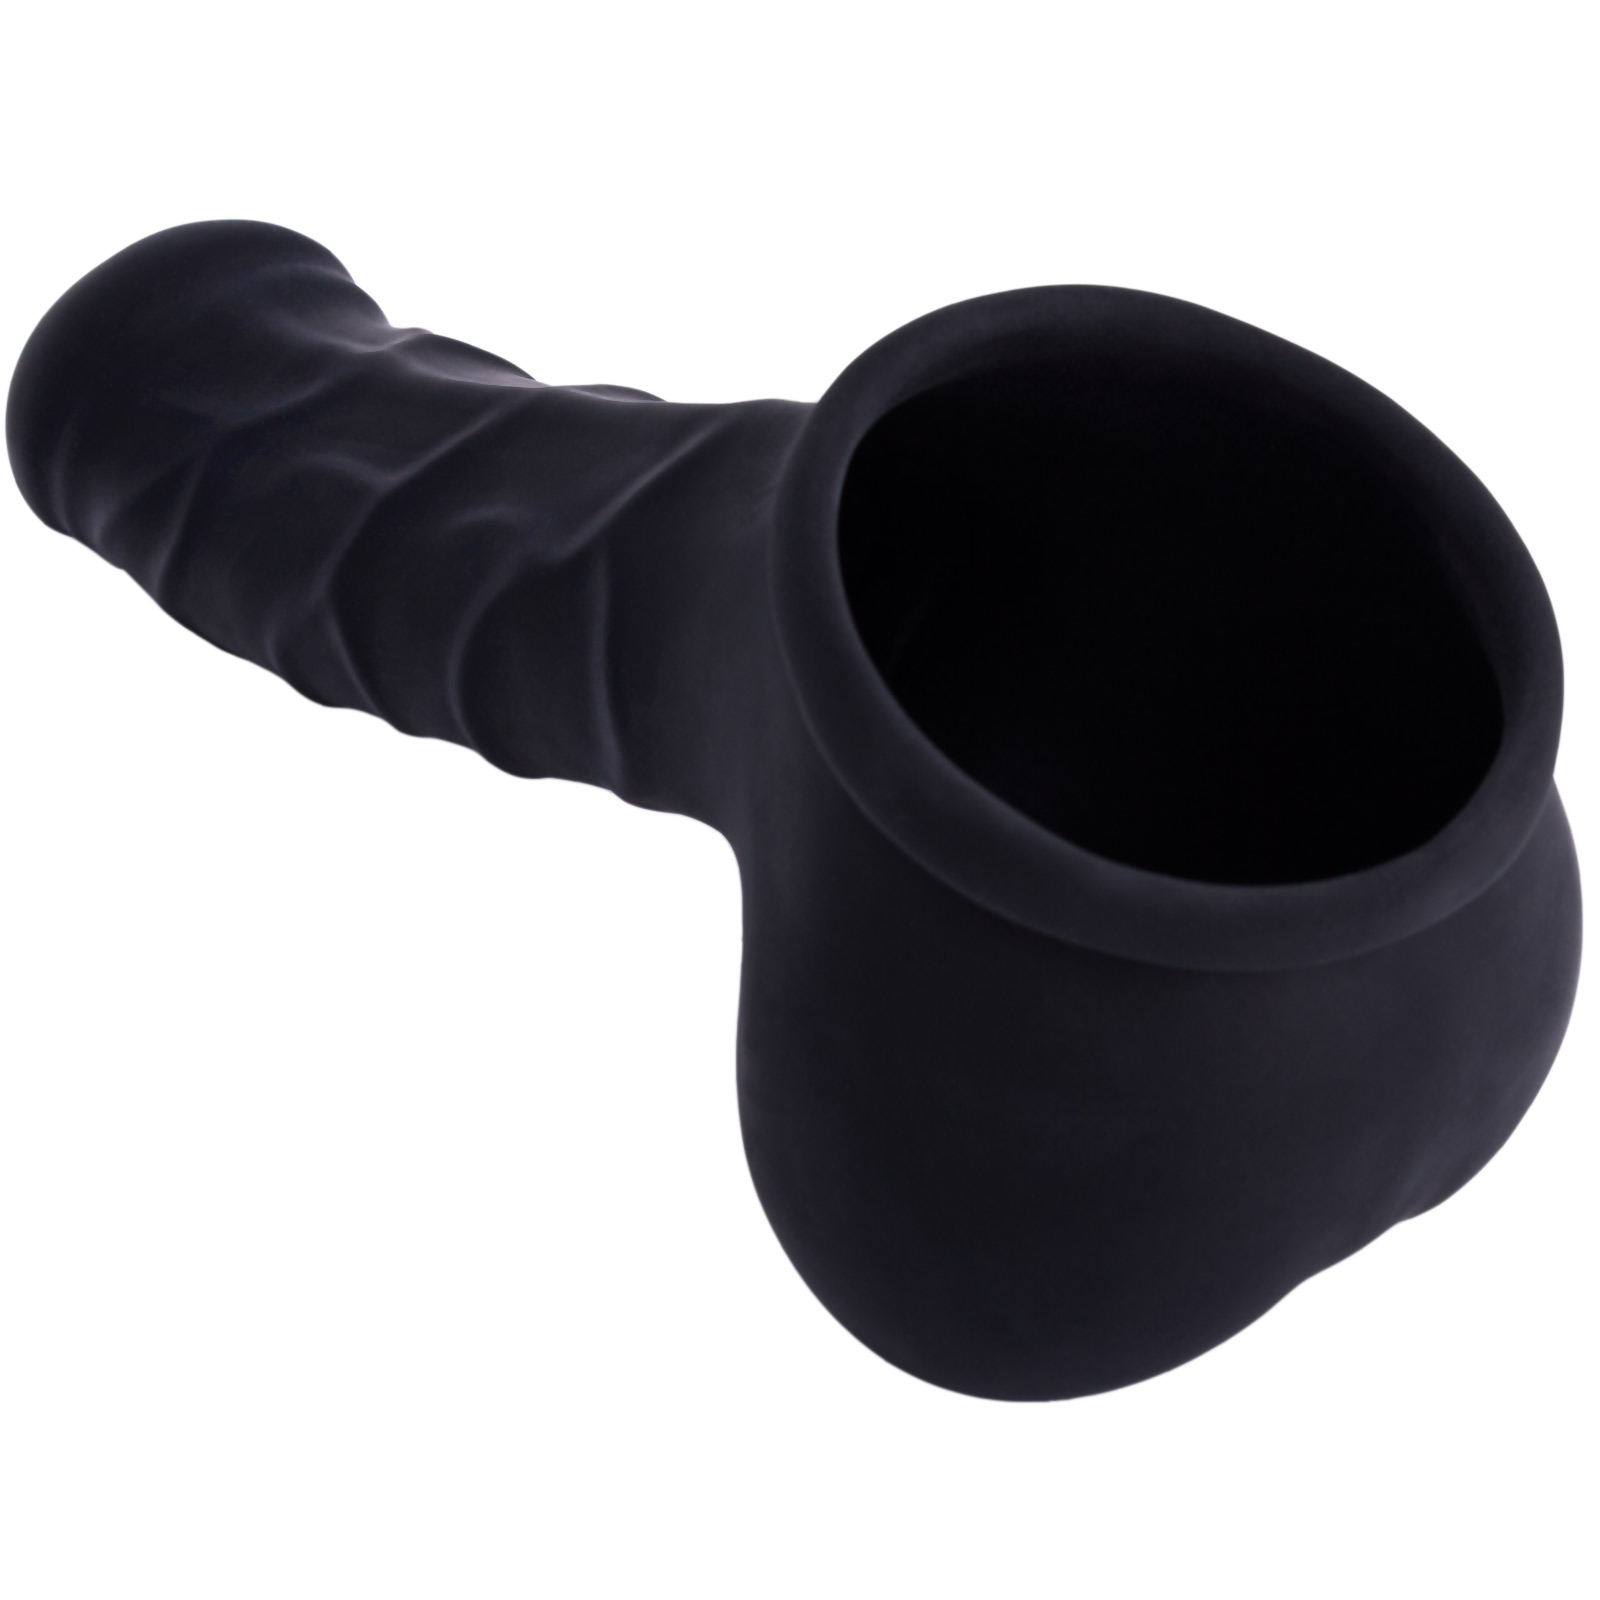 Toylie Latex Penis Sleeve «CARLOS» black, with strong veins and molded scrotum - suitable for vegans